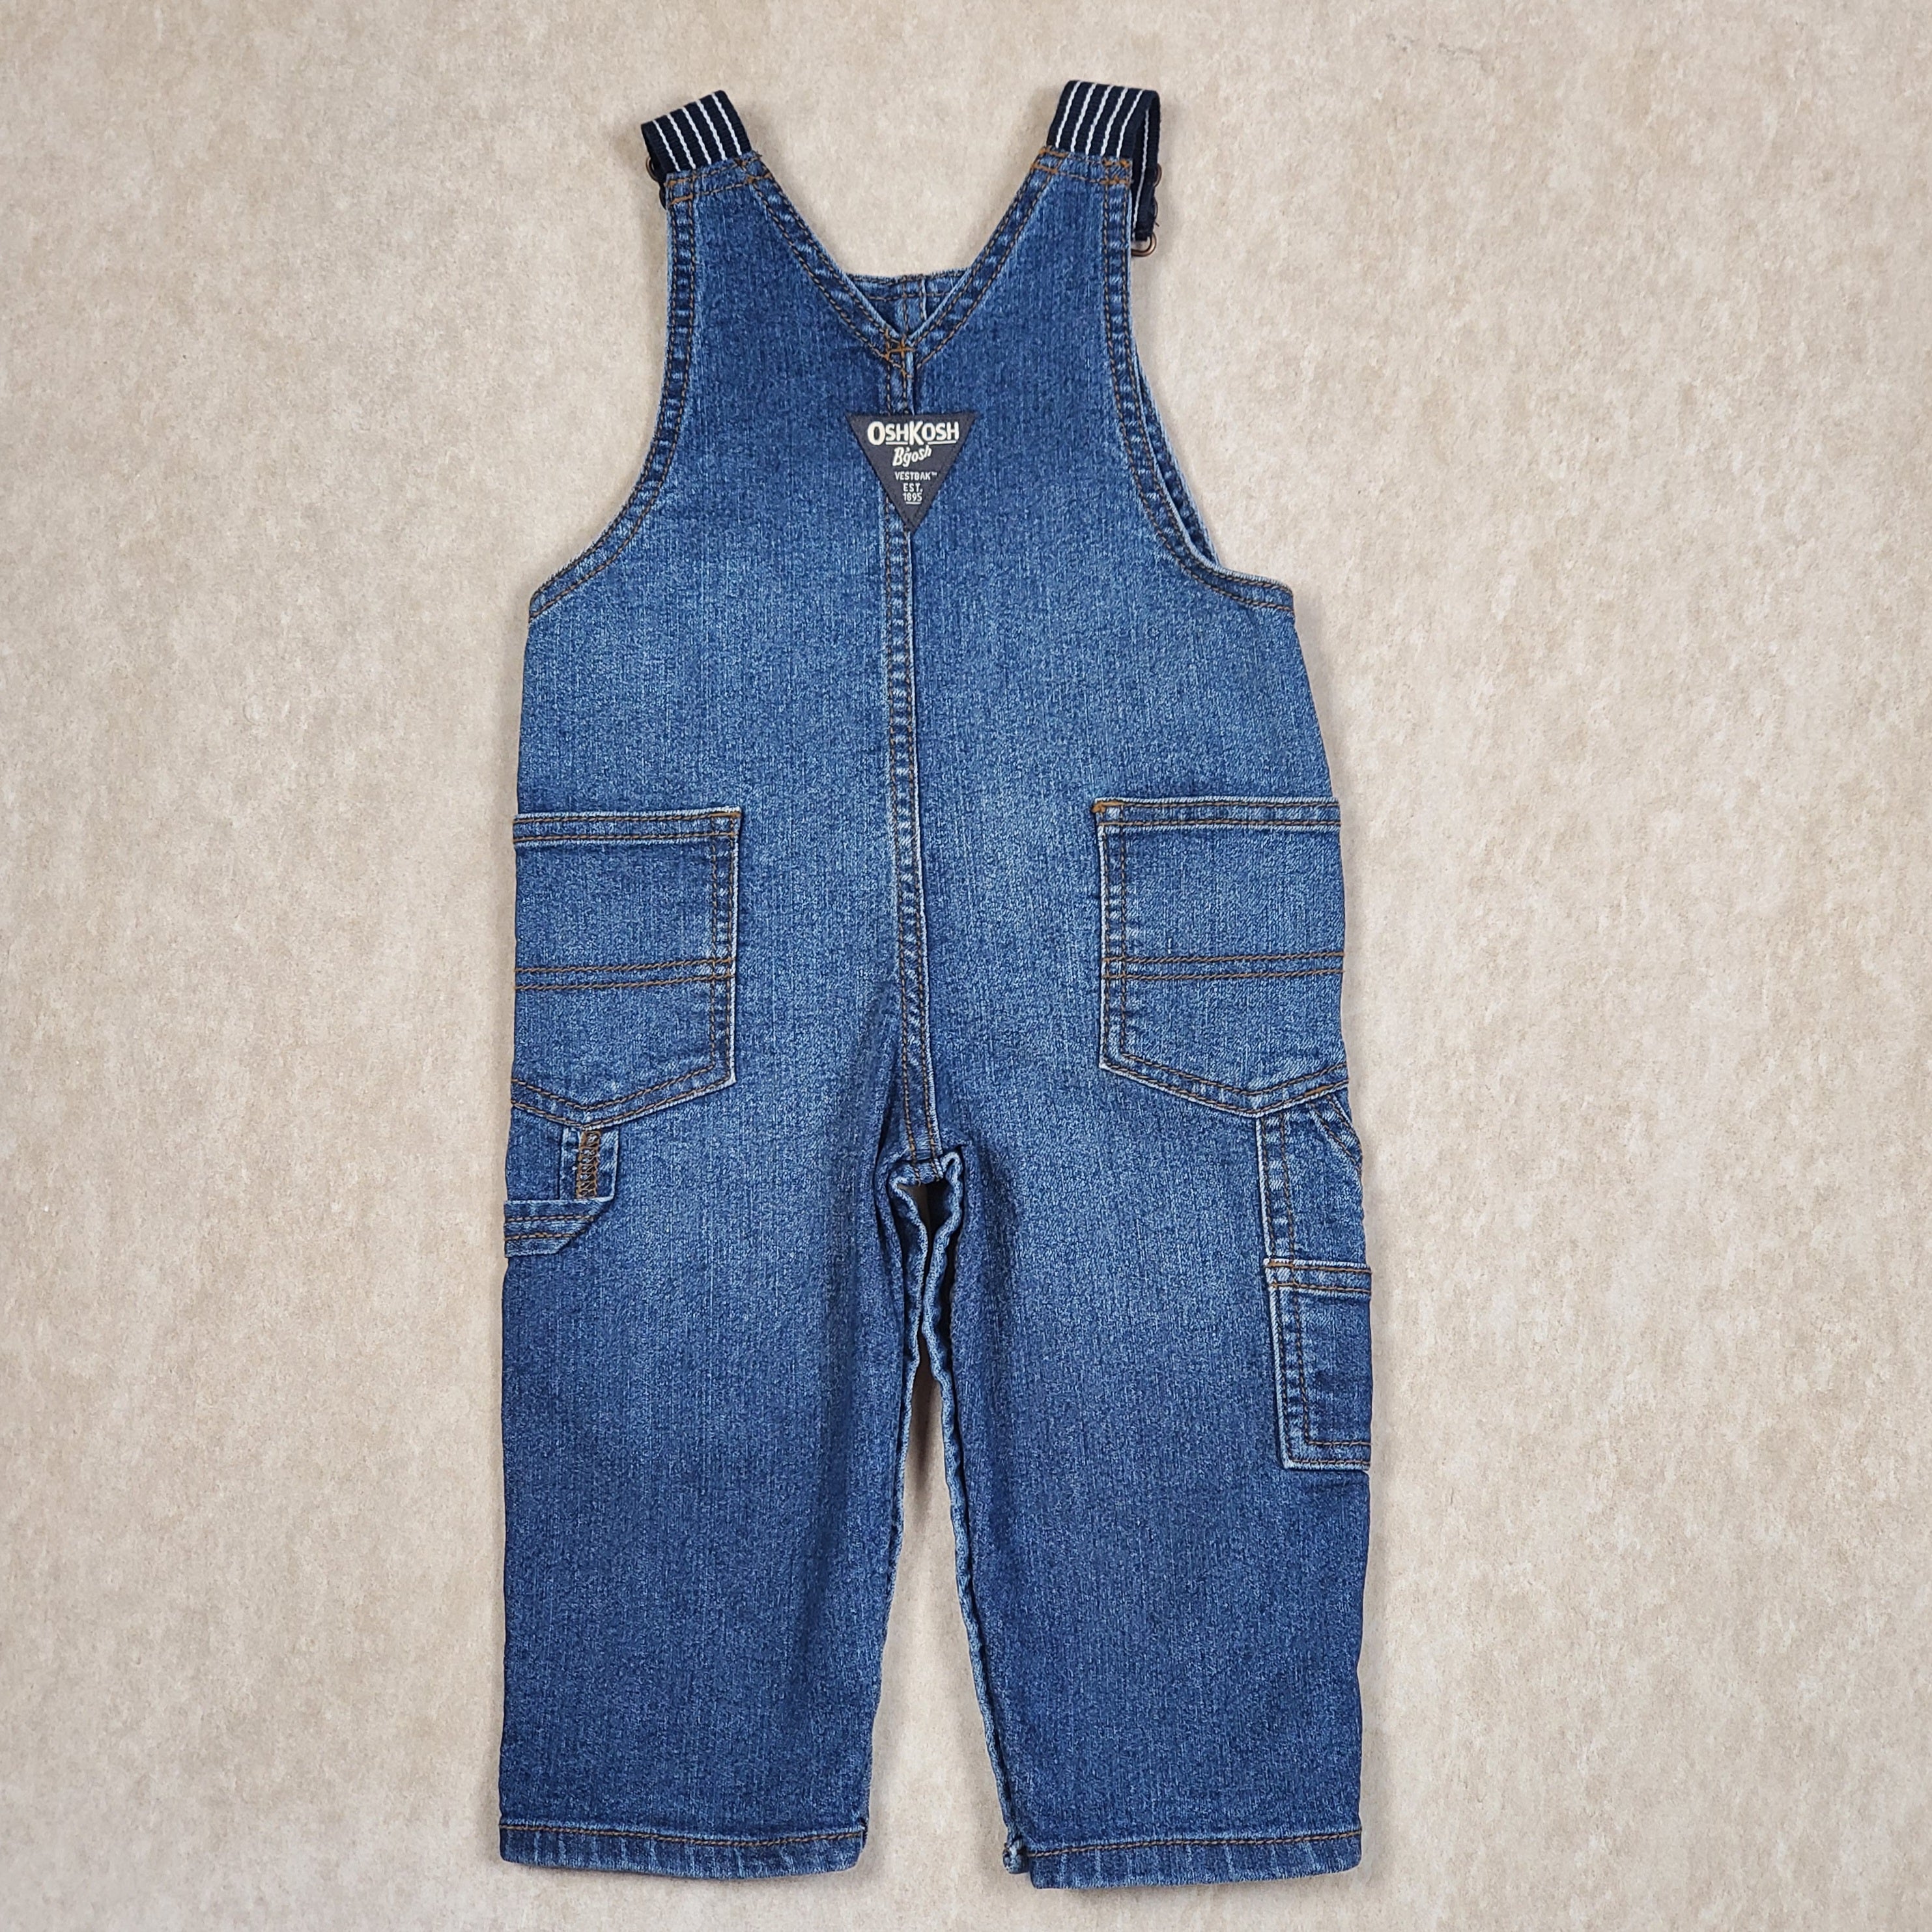 dolphin embroidered denim overalls, boy's stretch denim coveralls, infant boy's  denim set, denim boy's outfit, denim play set with dolphin